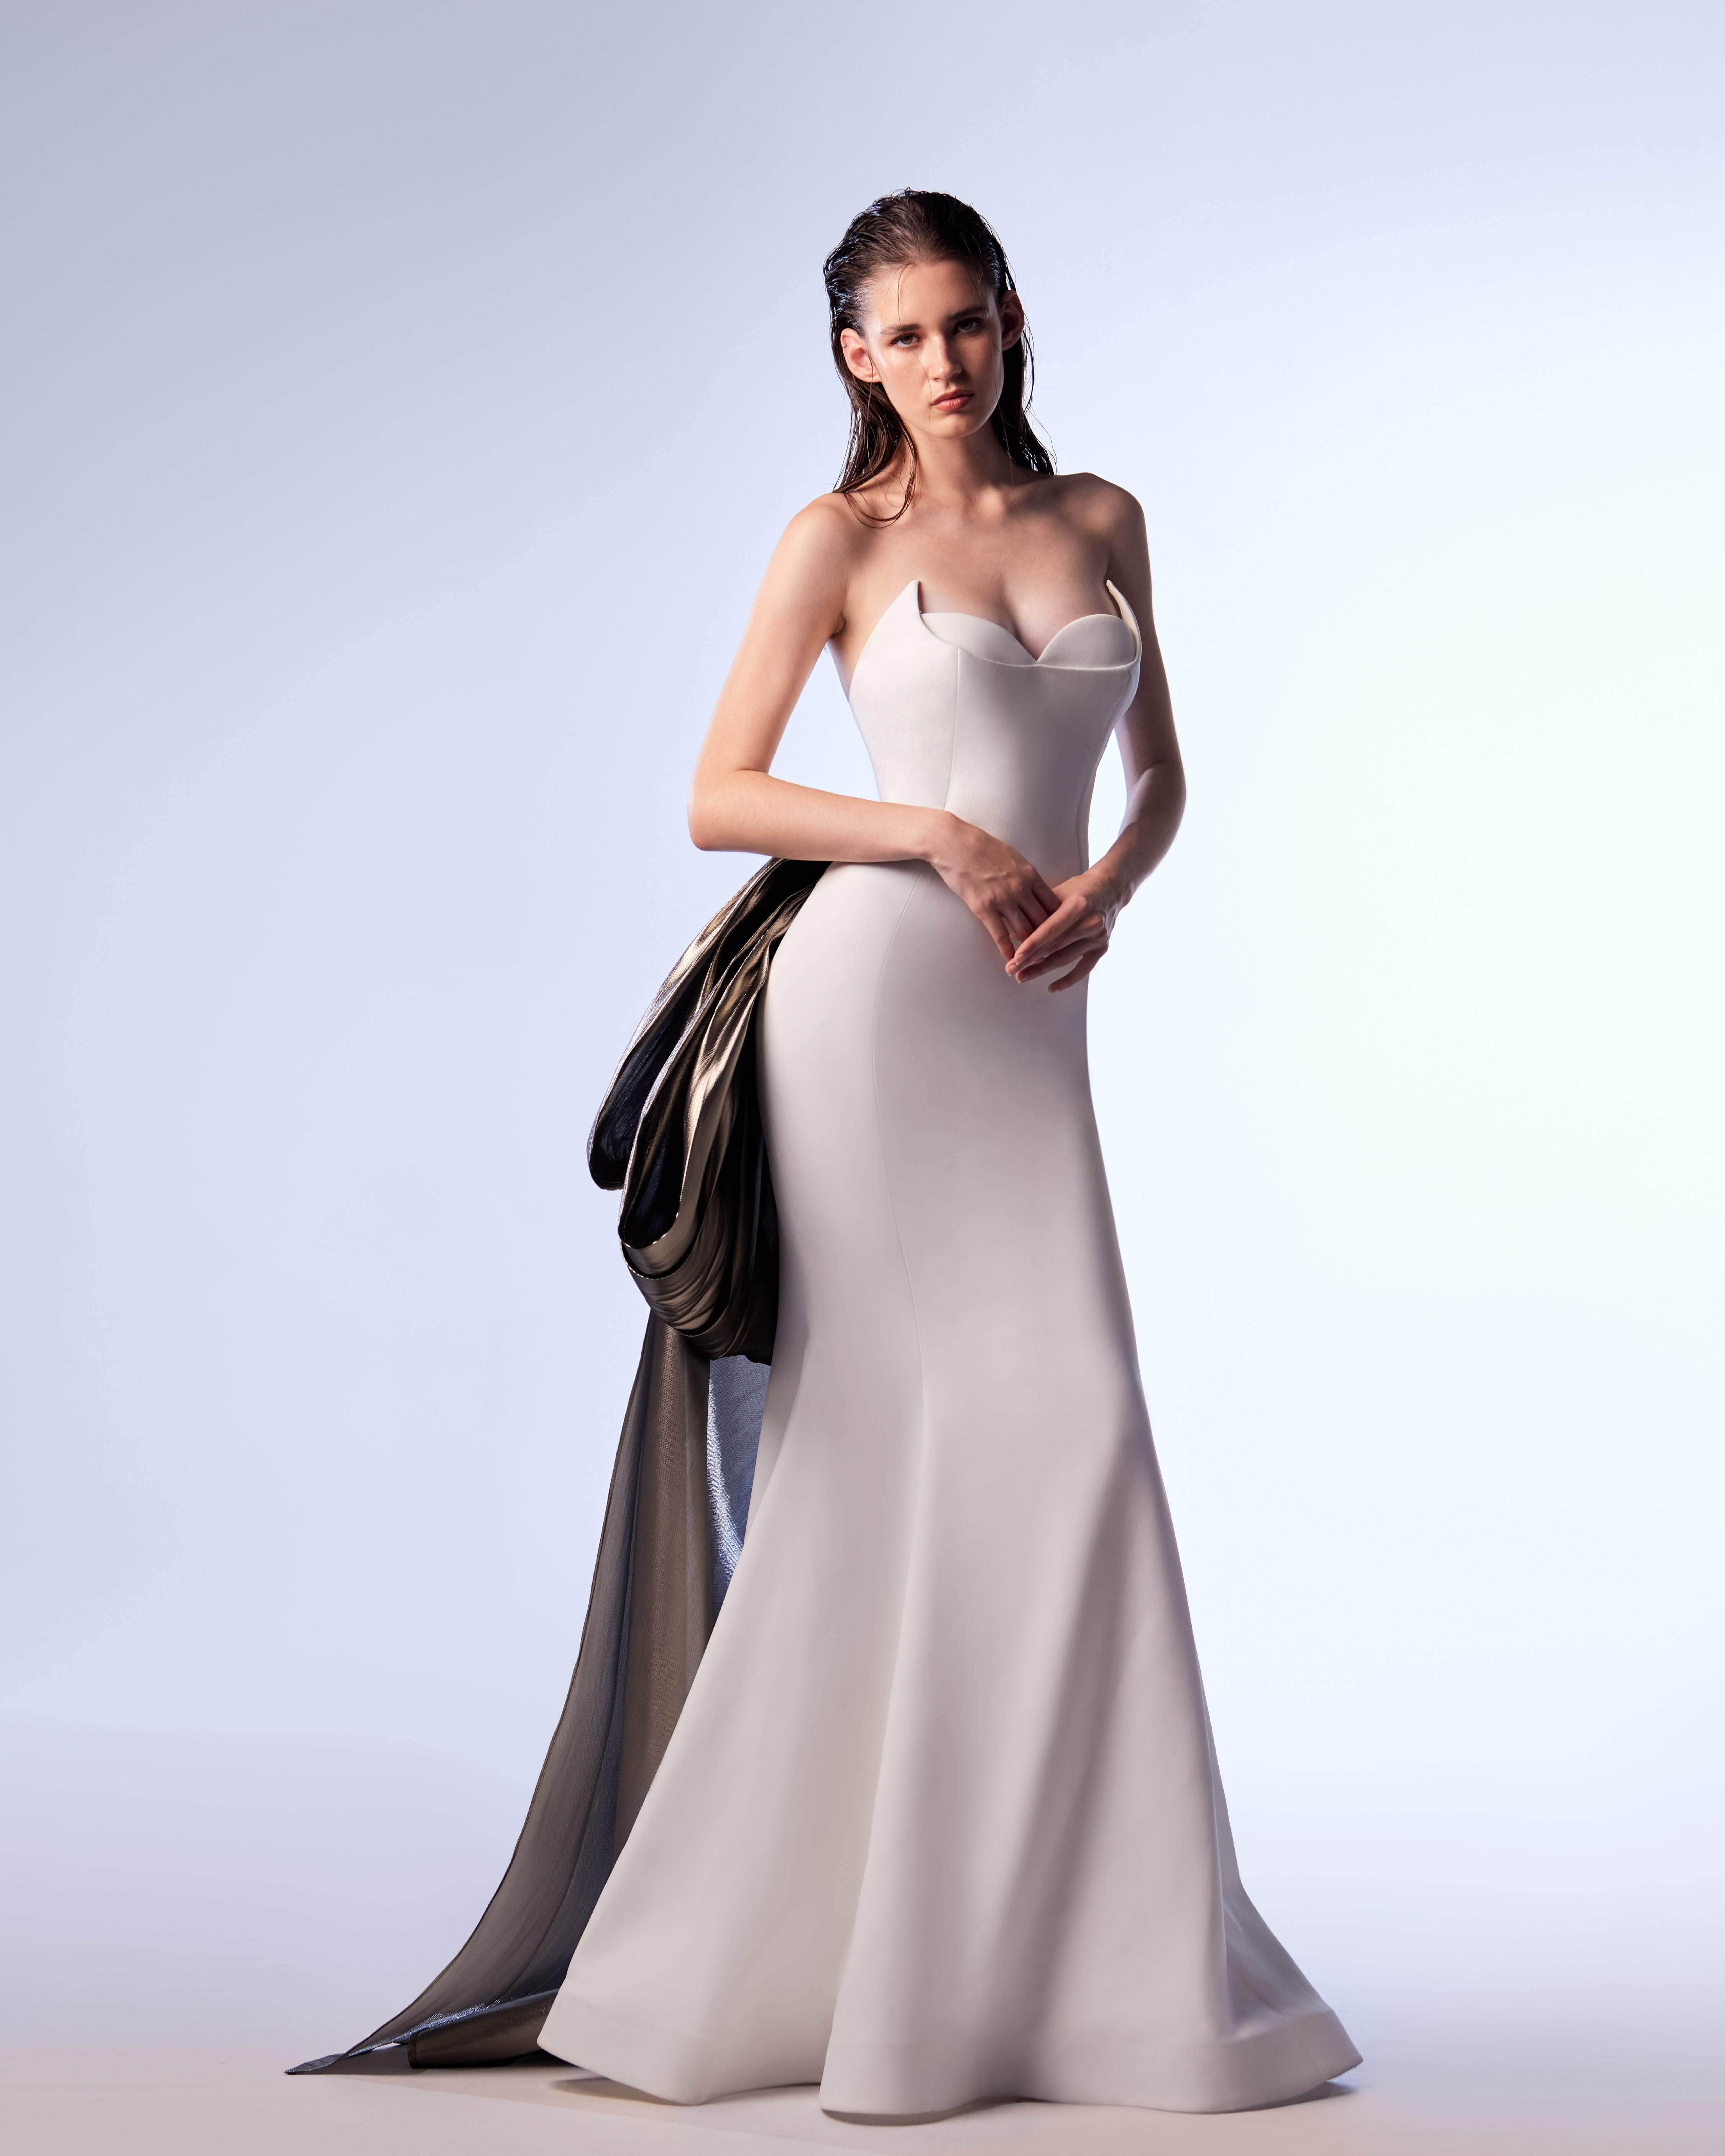 MNM Couture G1720 - Metallic Bow Evening Gown
